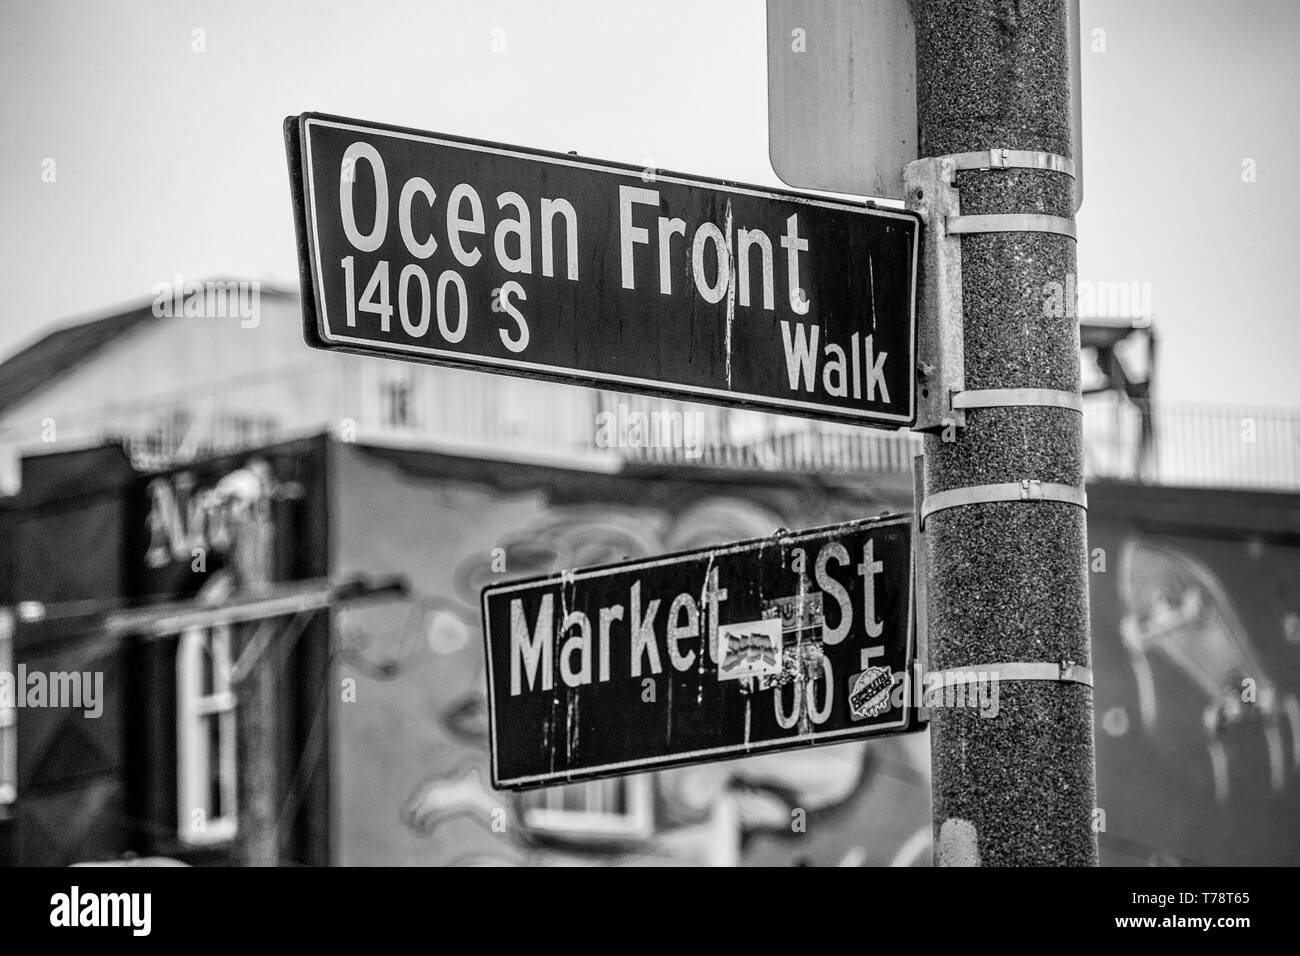 Ocean Front street sign in Venice Beach Los Angeles Stock Photo